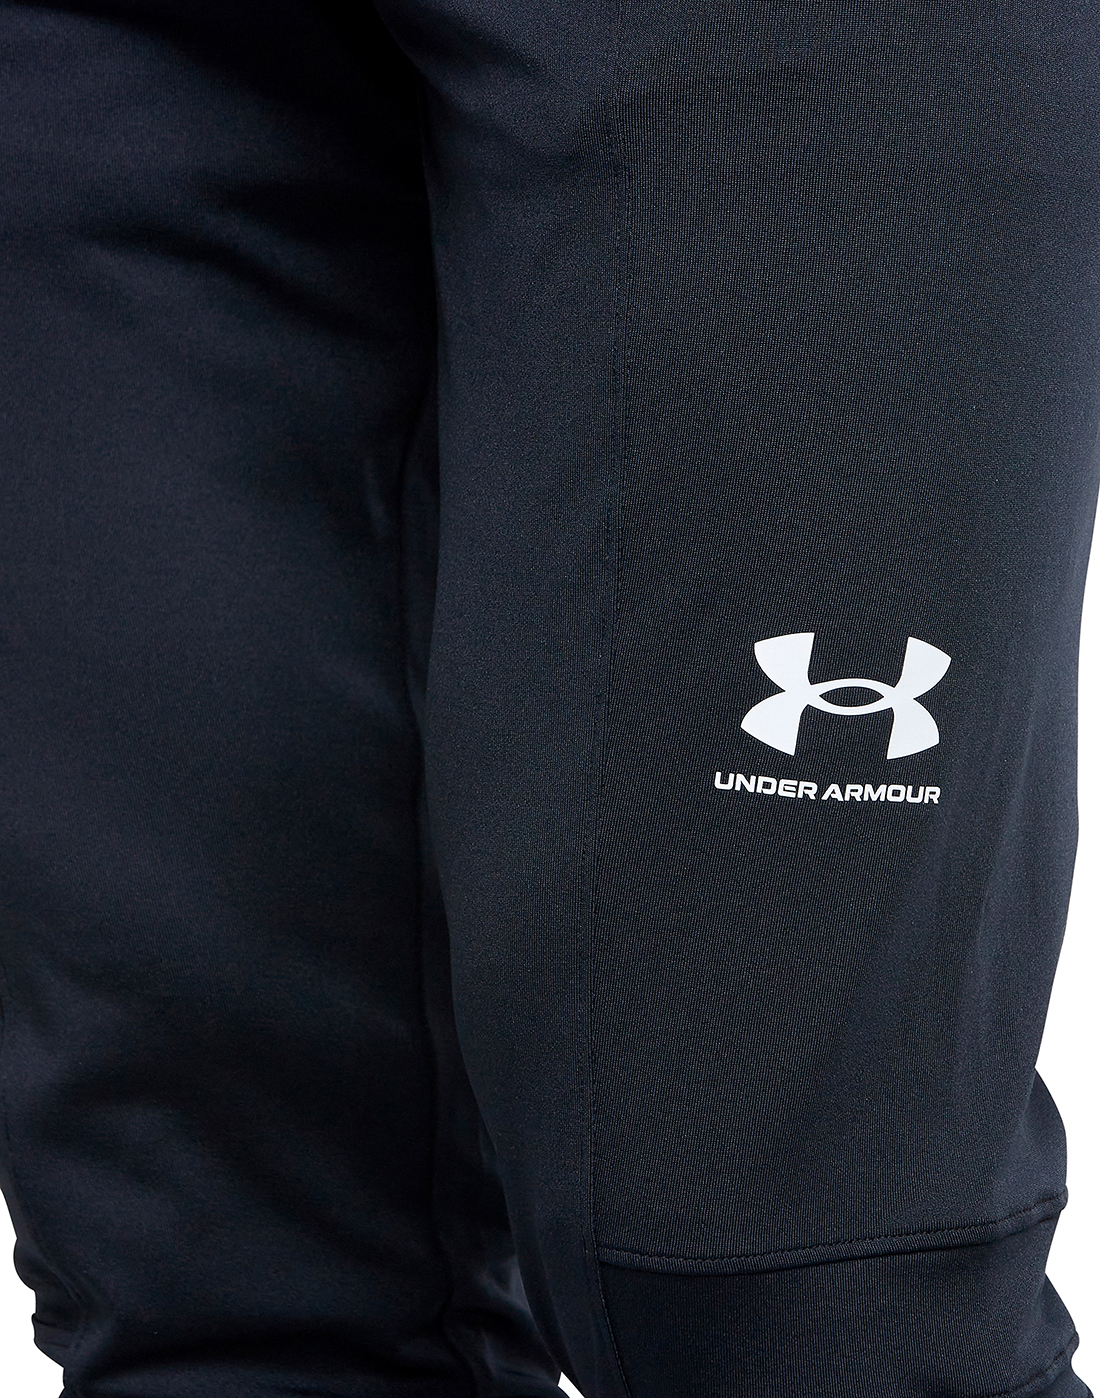 Under Armour Mens Challenger Training Pant - Black | Life Style Sports UK